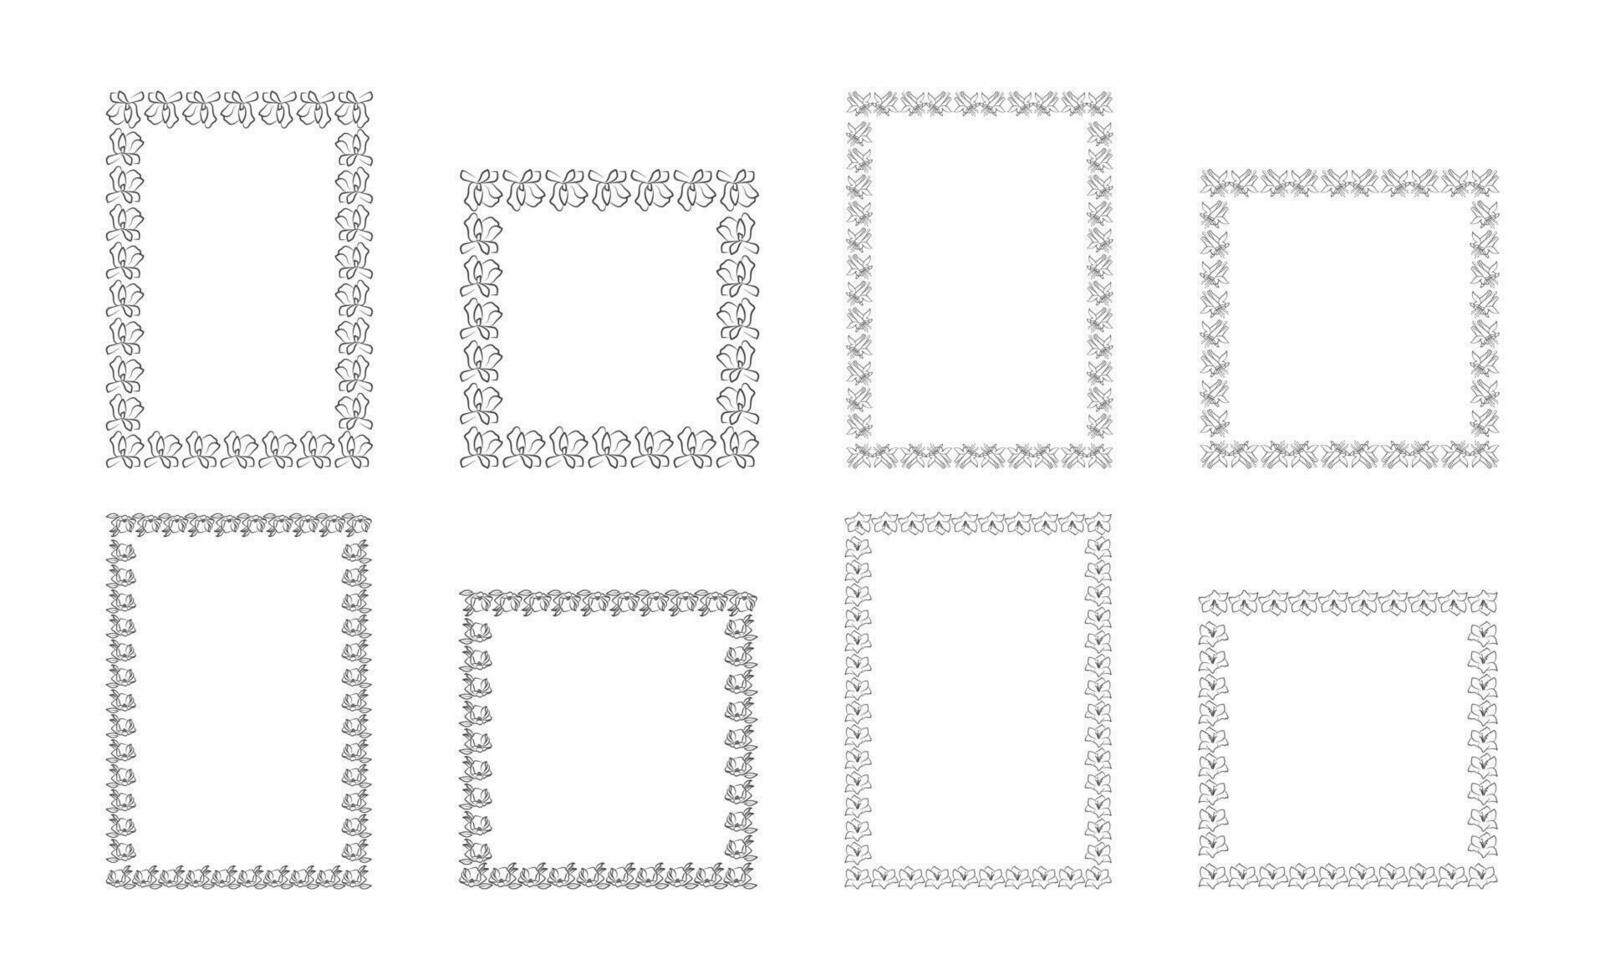 Retro elegant borders and filigree floral ornaments. Isolated vector illustration set. Template of decorative vintage frames, a4 and square size